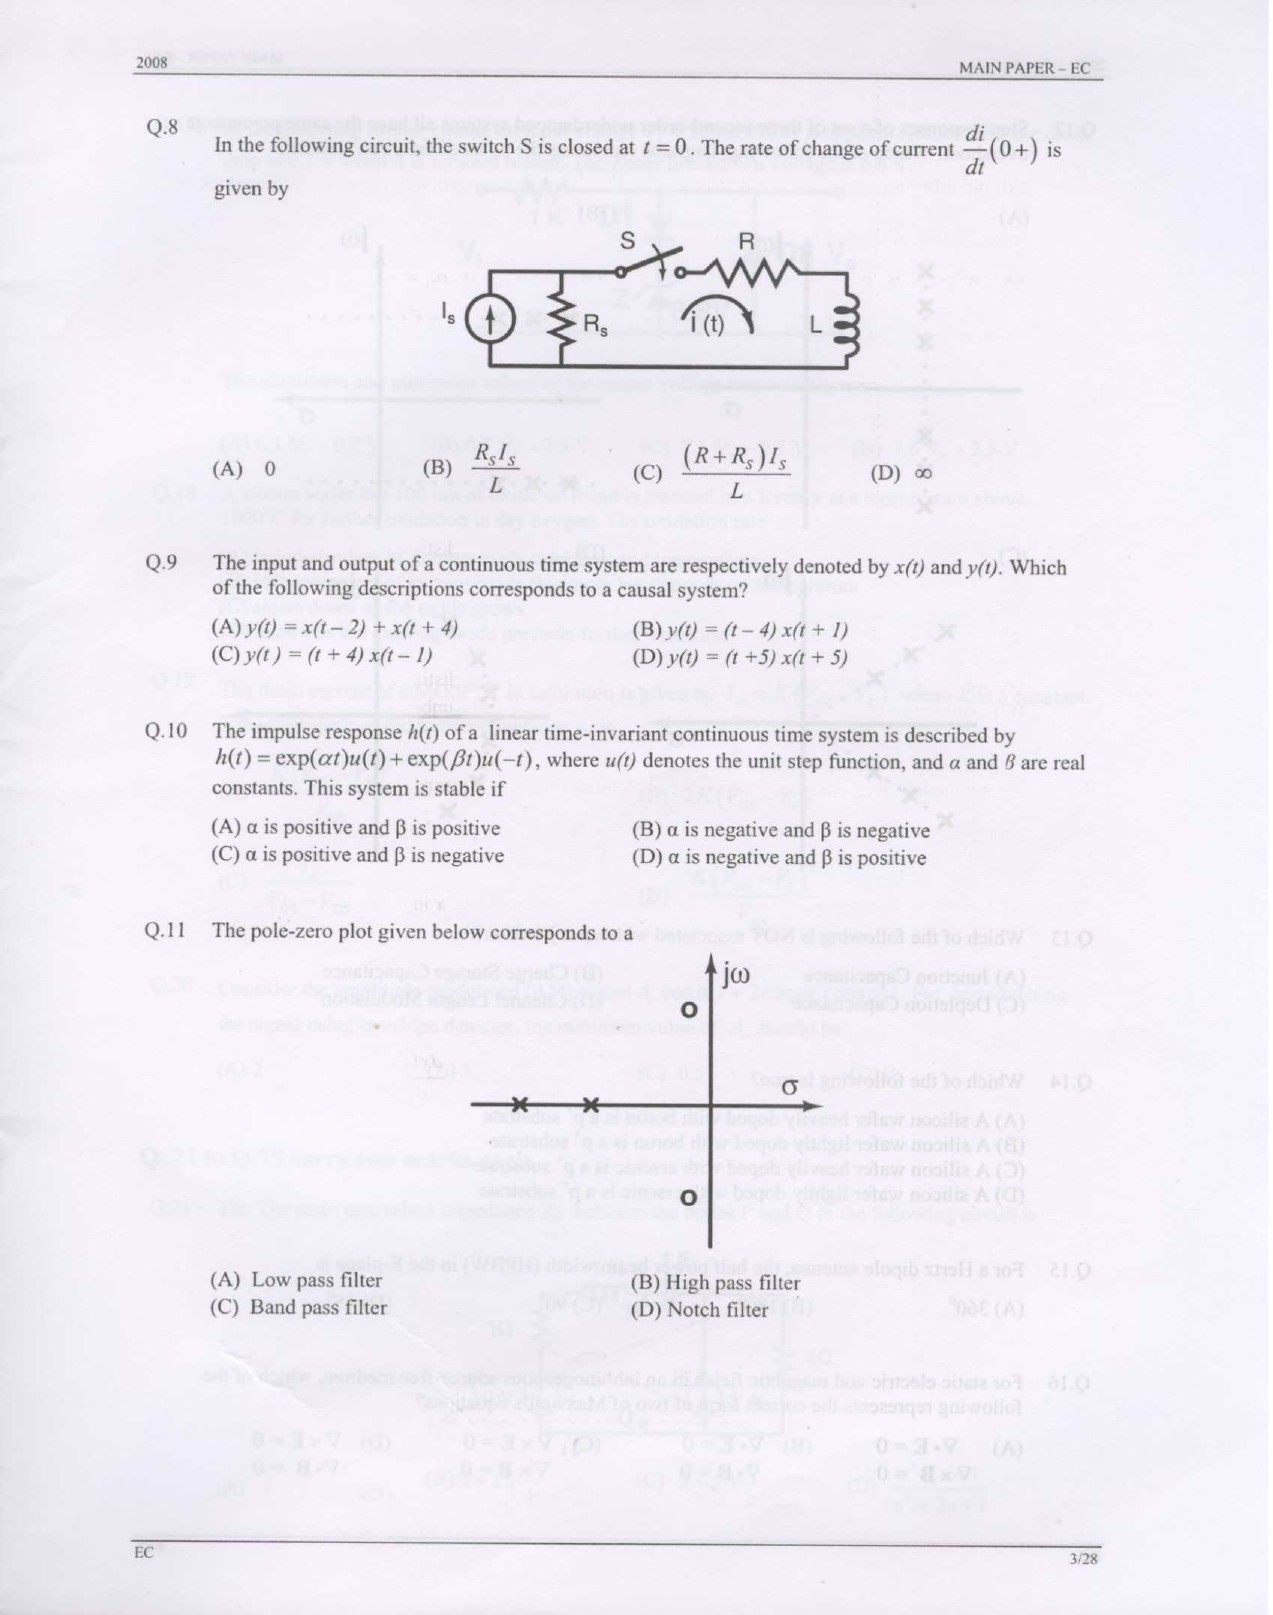 GATE Exam Question Paper 2008 Electronics and Communication Engineering 3